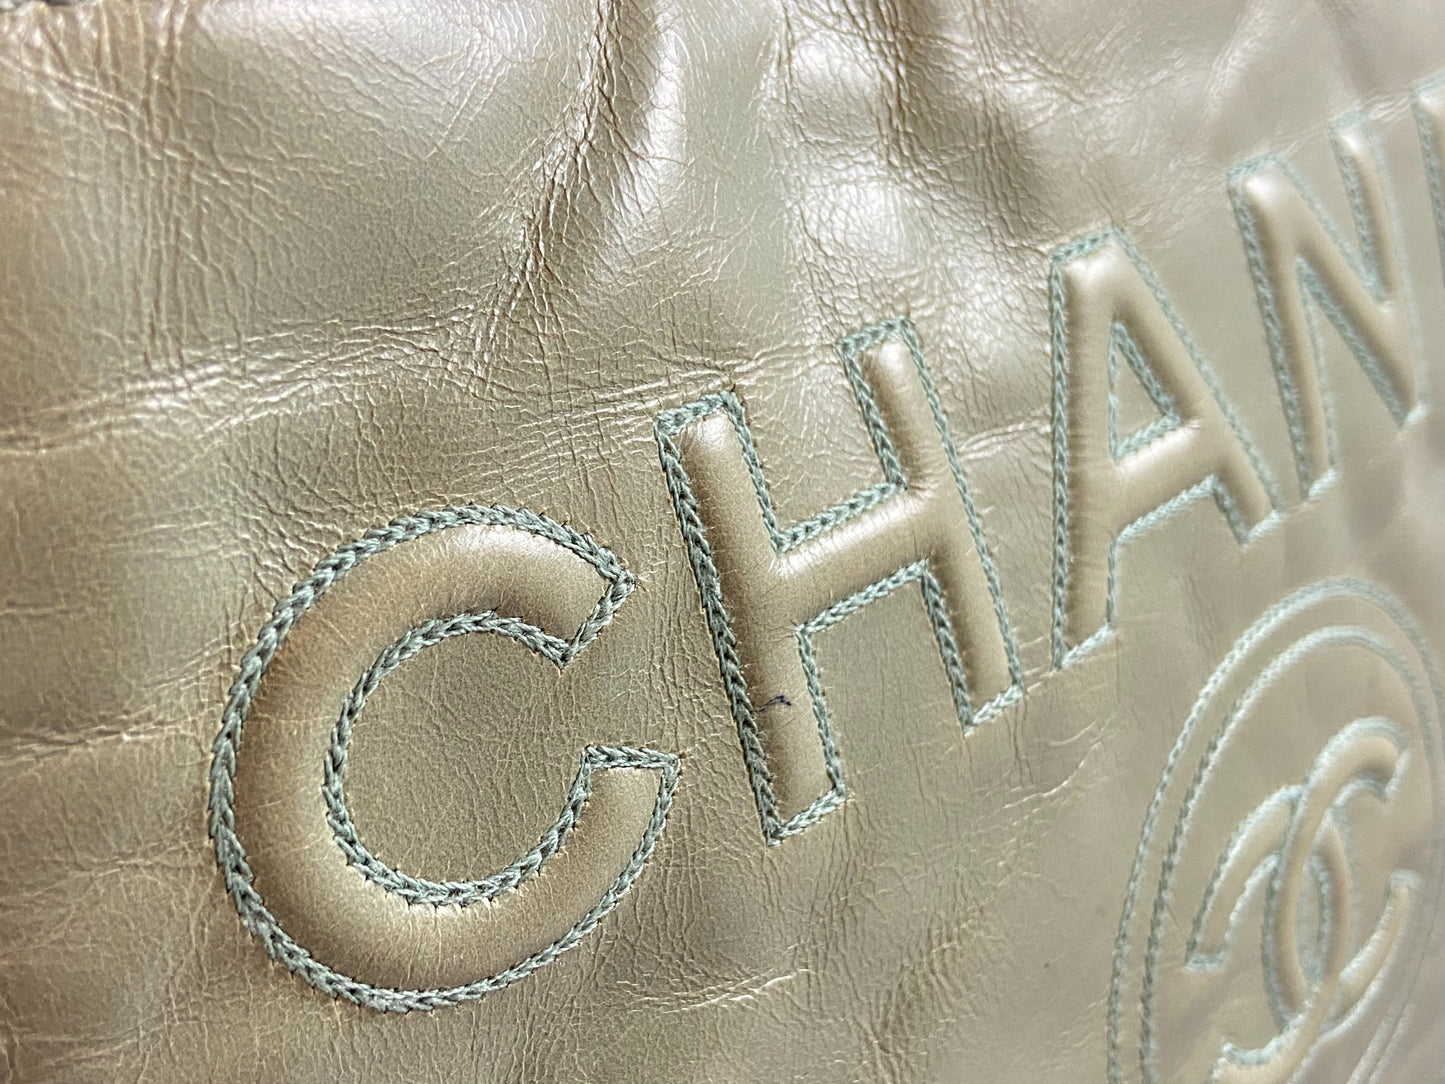 Chanel Deauville Hand / Tote Bag Mint Green Leather